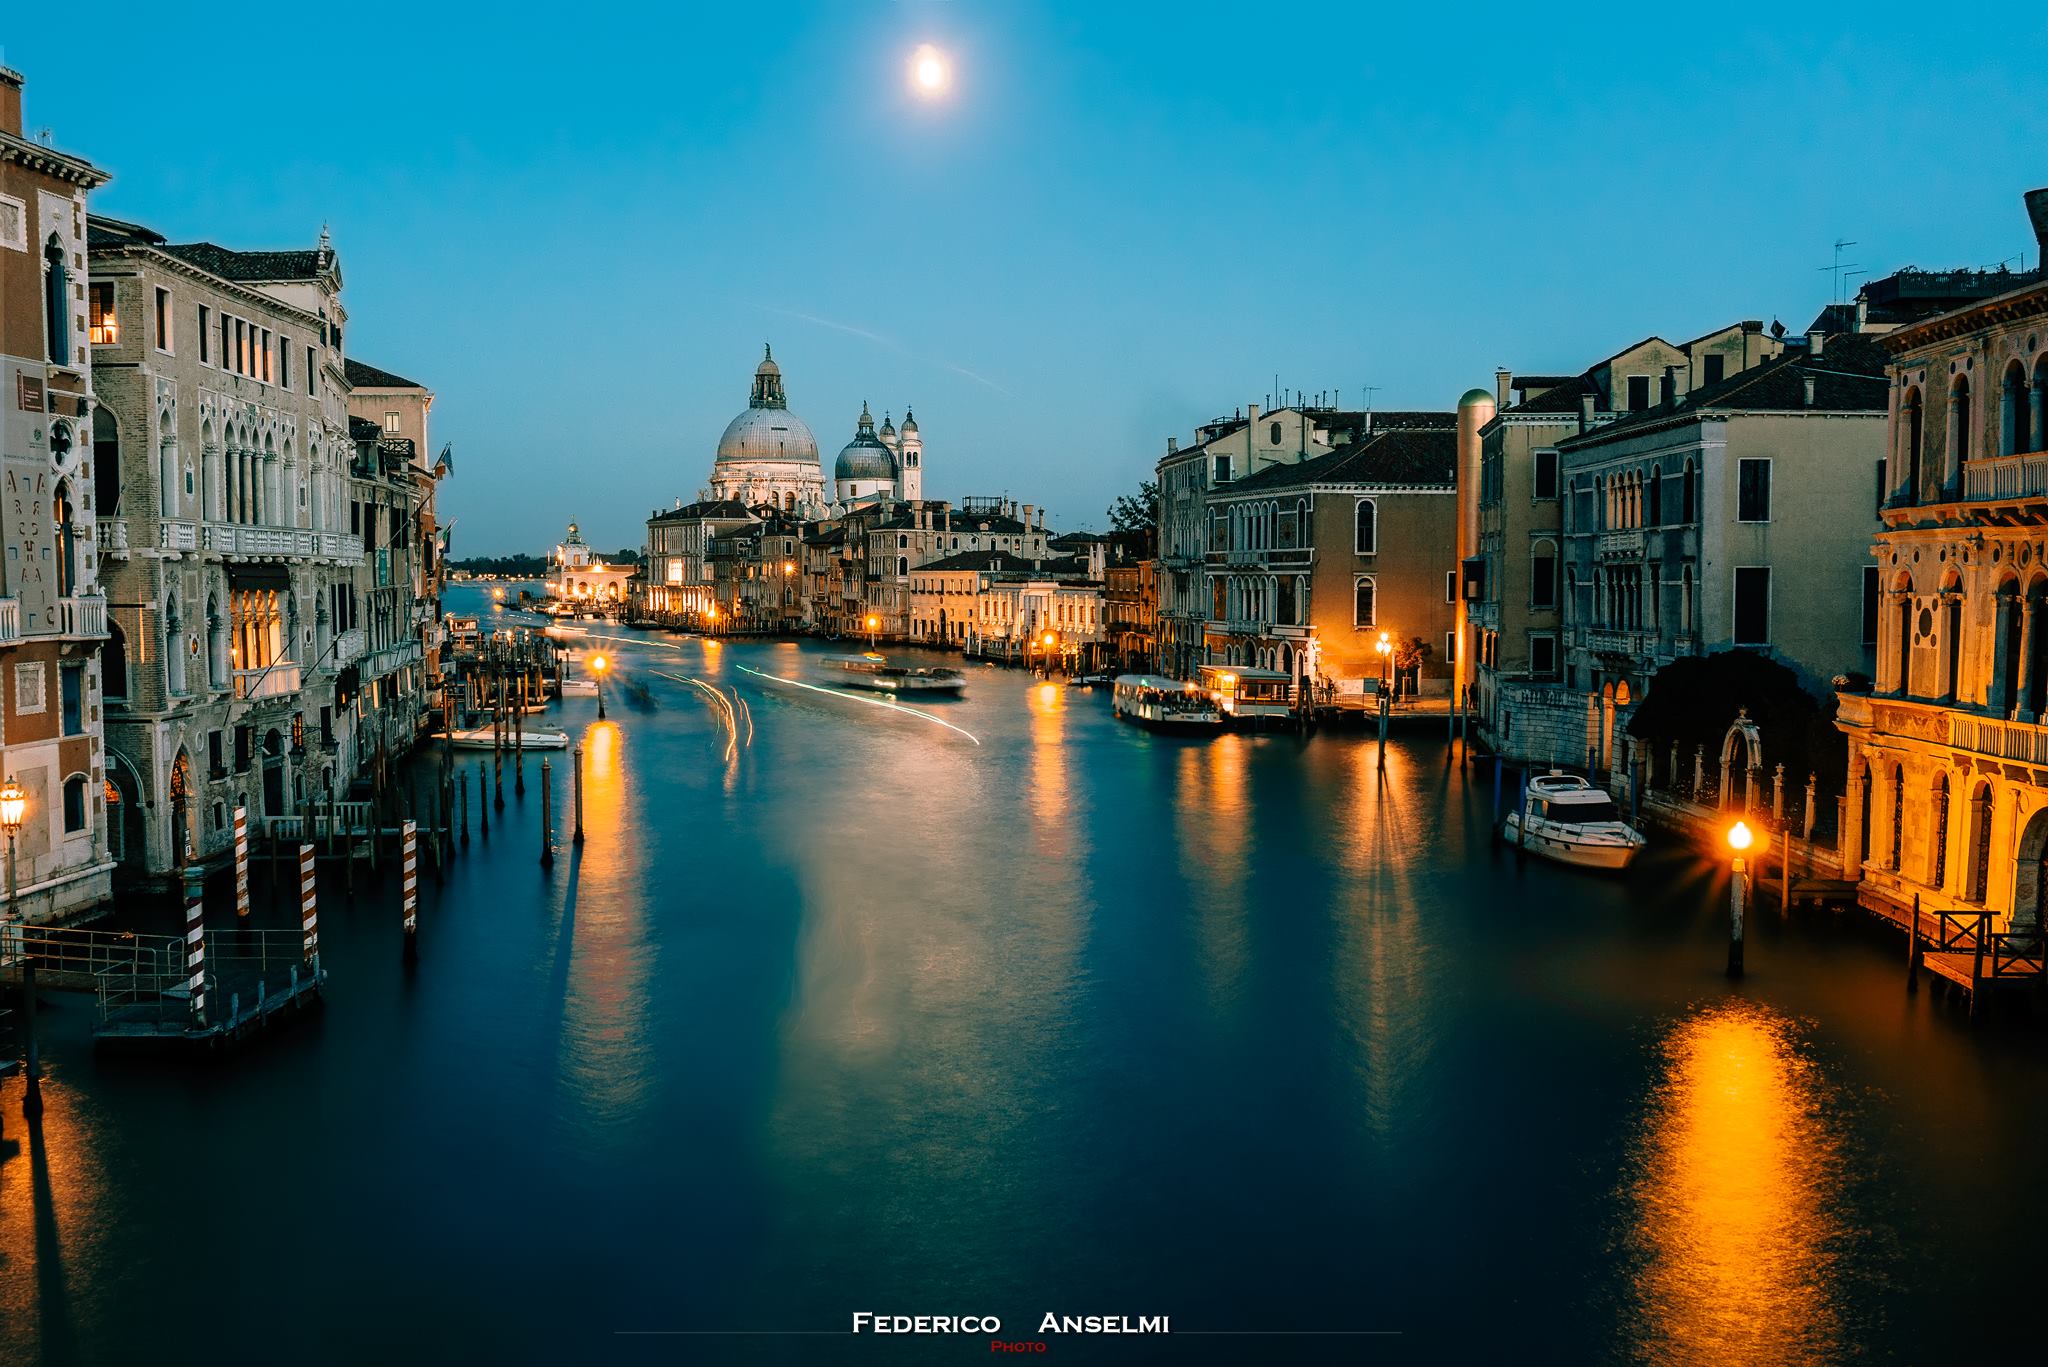 One evening in Venice...